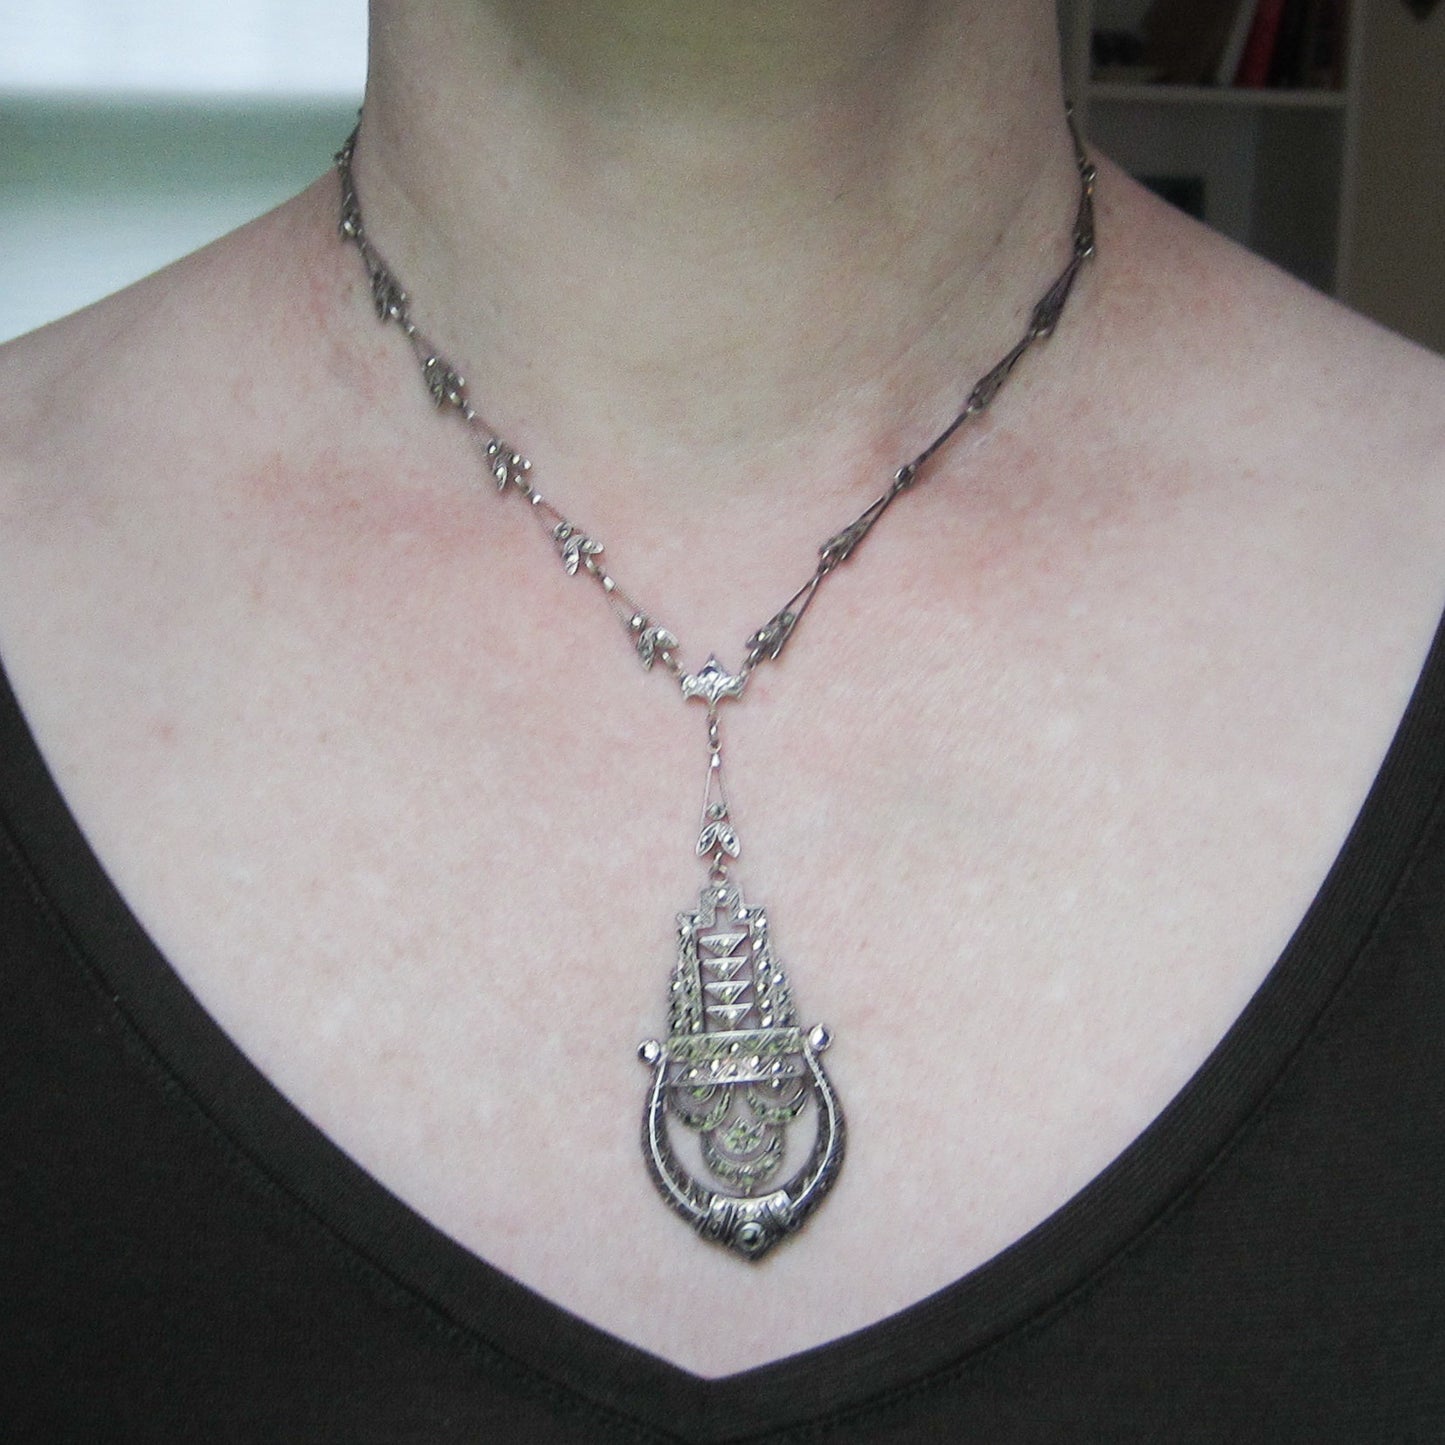 HOLD--Art Deco Marcasite Drop Necklace Sterling Silver c. 1930